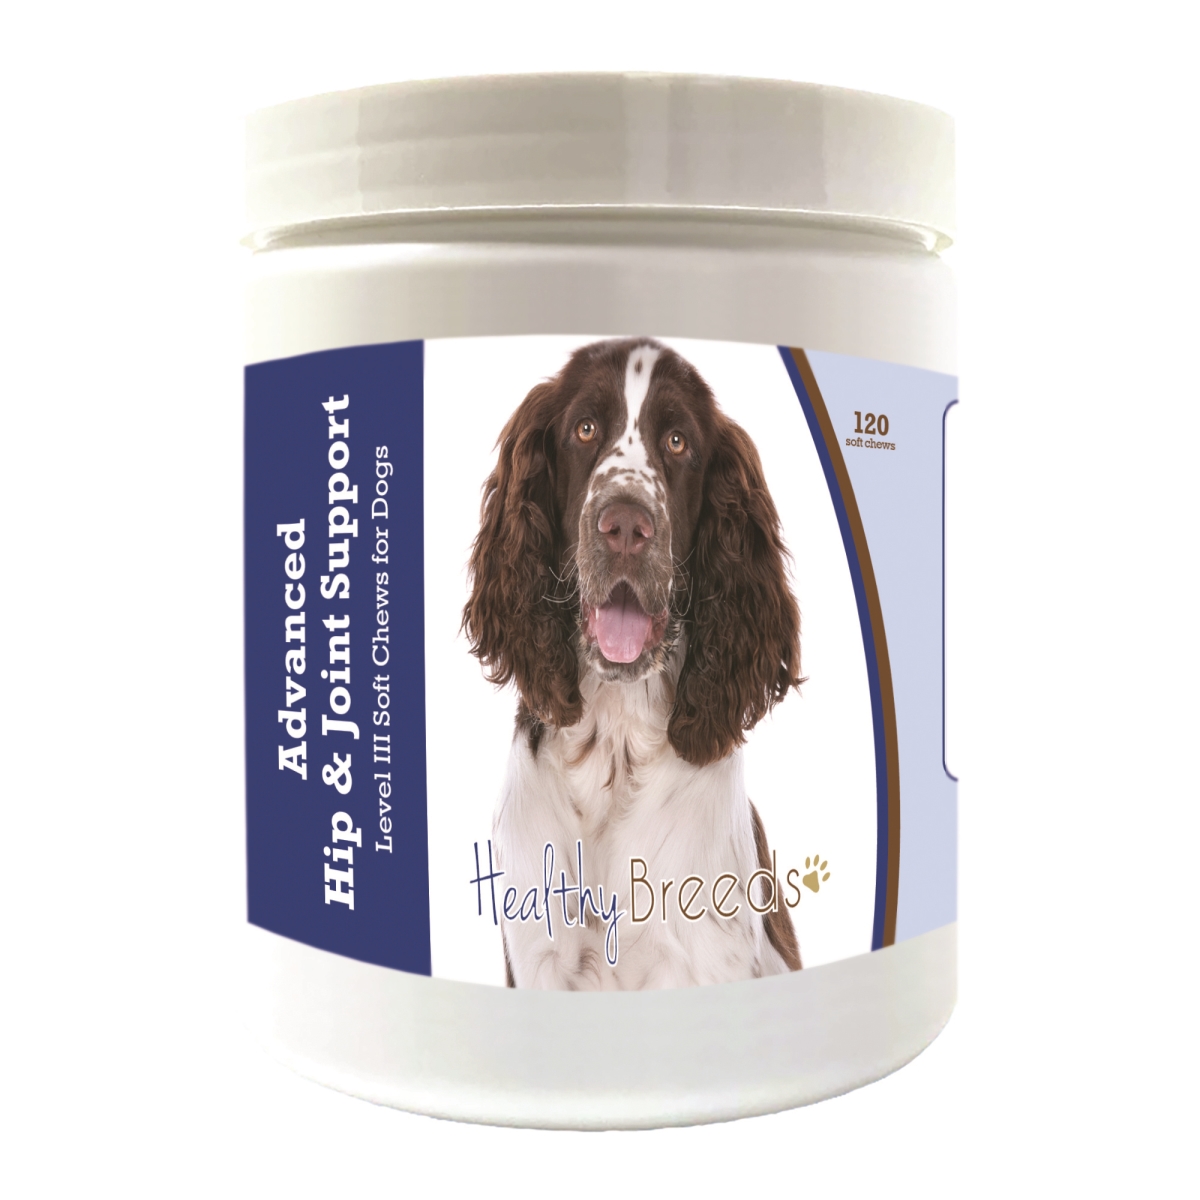 Picture of Healthy Breeds 192959898200 English Springer Spaniel Advanced Hip & Joint Support Level III Soft Chews for Dogs